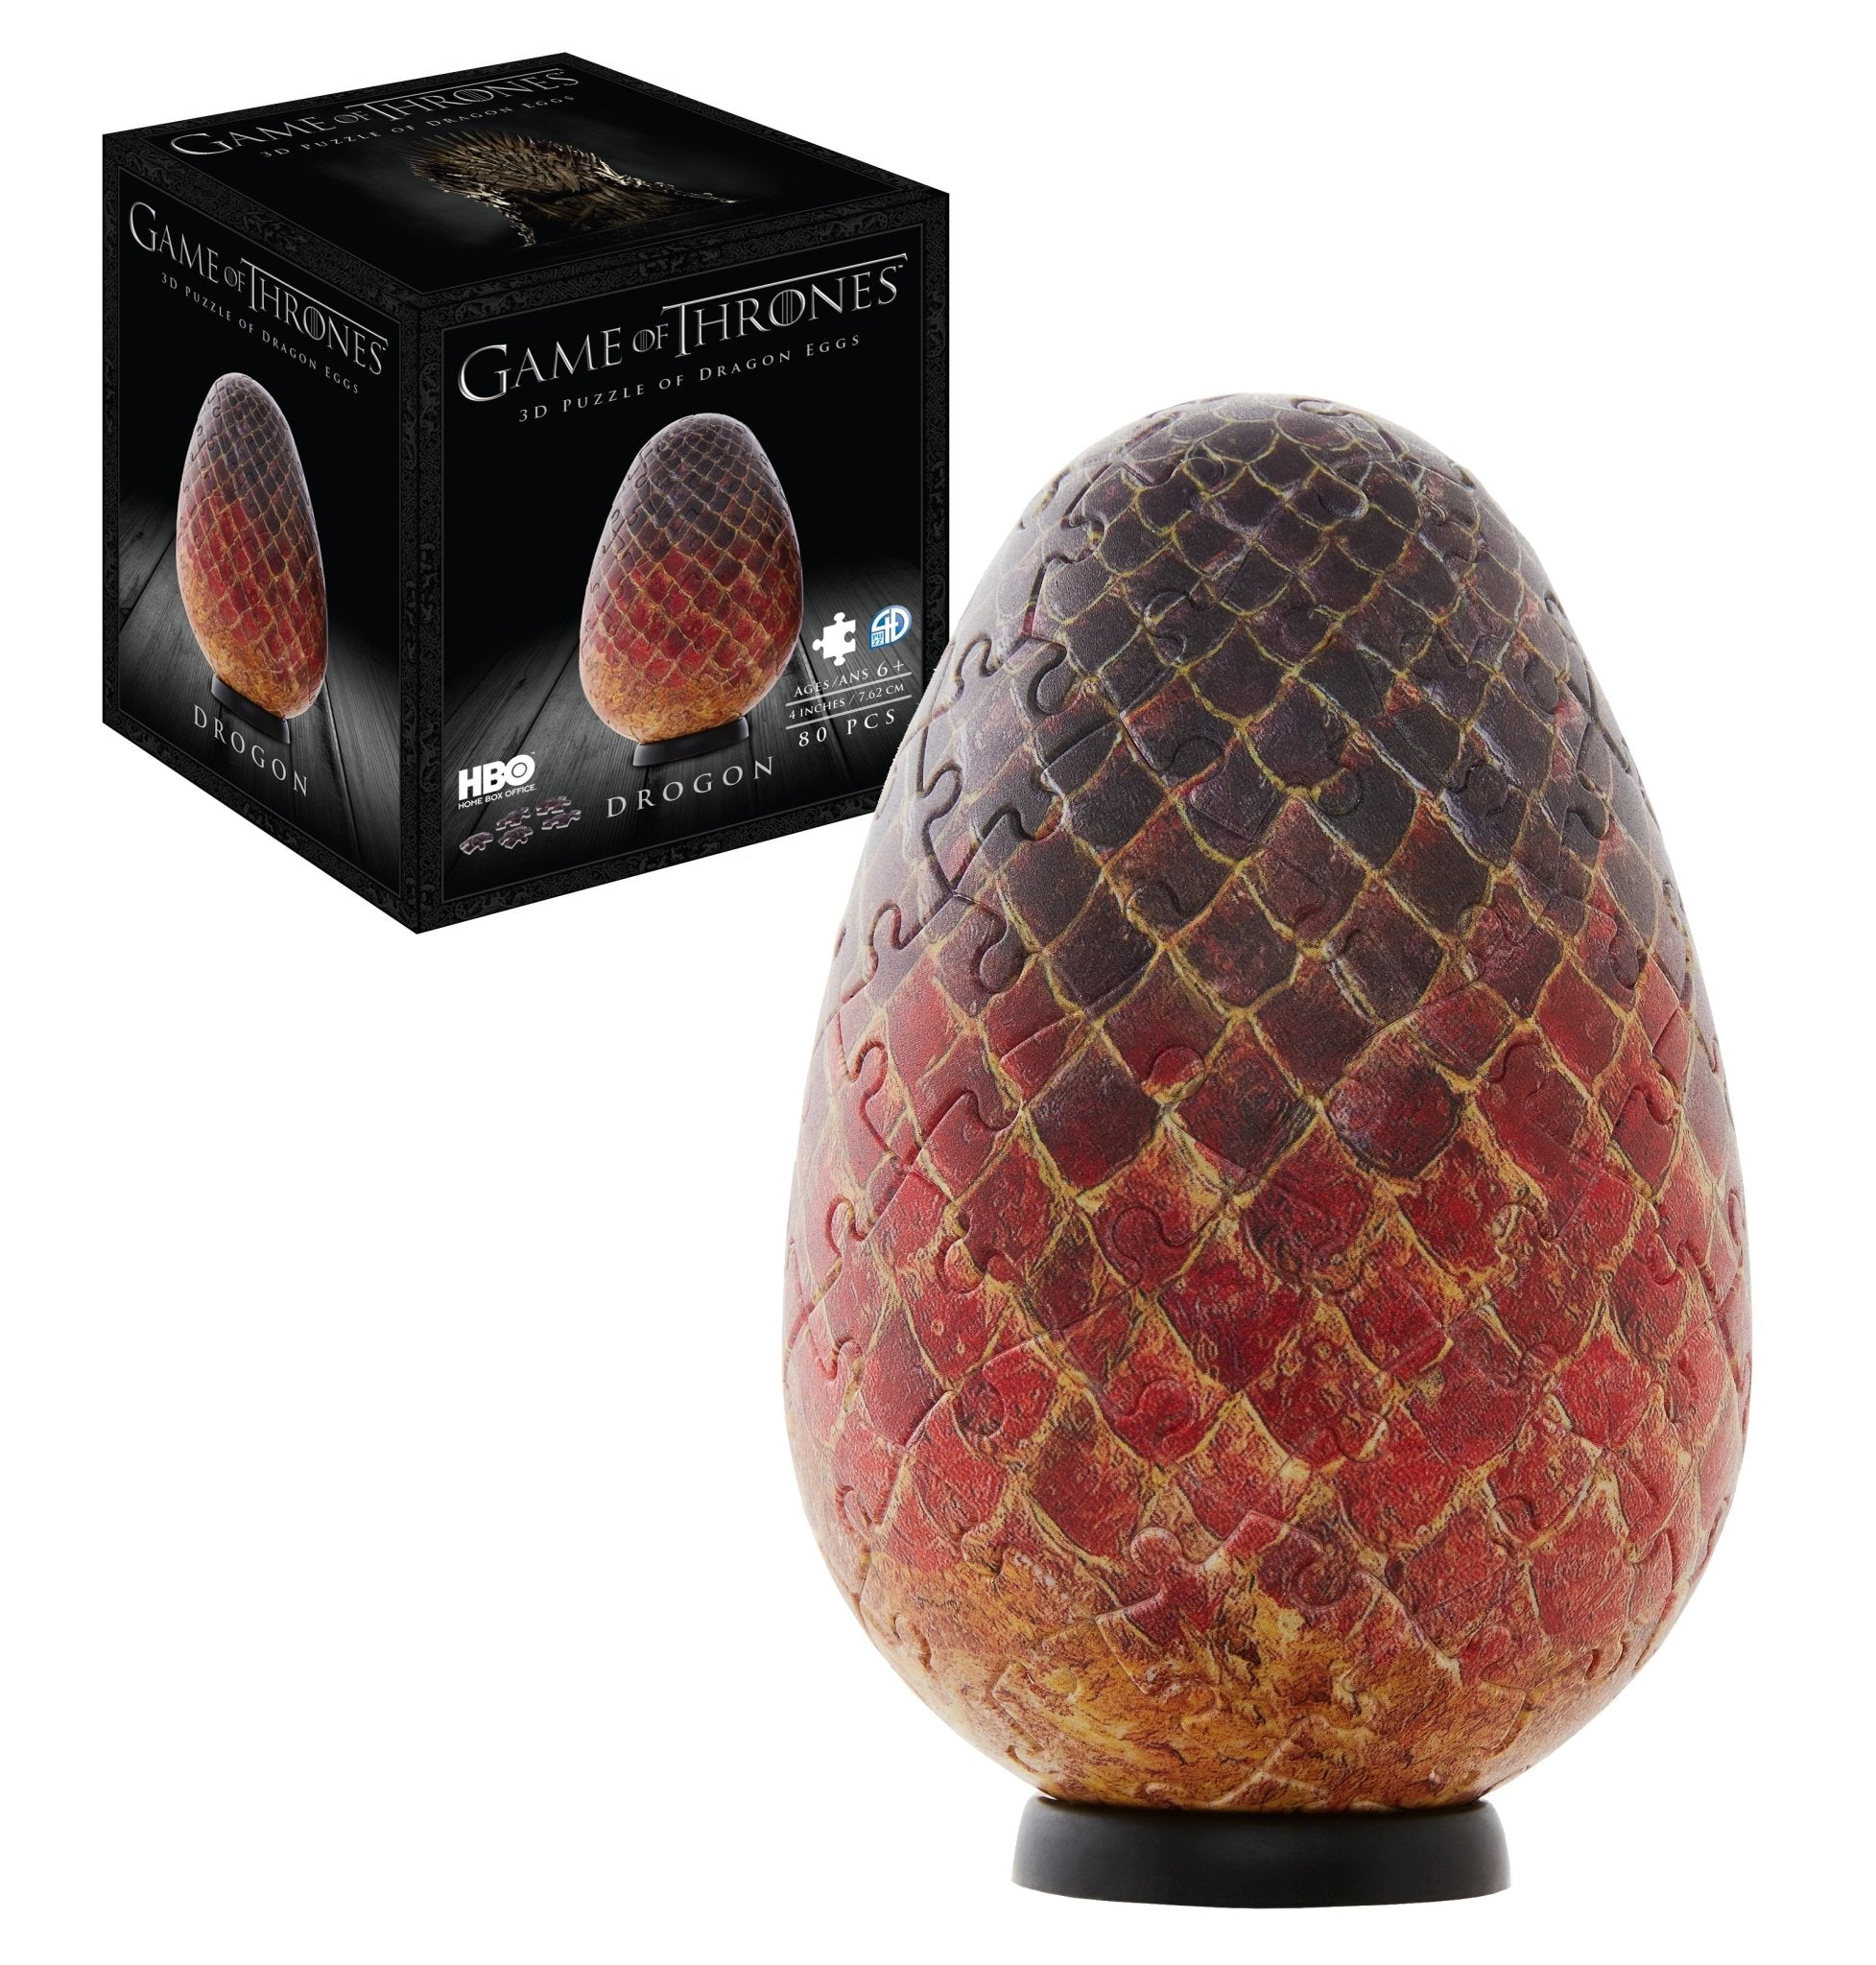 Game of Thrones Dragon Eggs Jigsaw Puzzle Singles4D Puzzle | 4D Cityscape4DPuzz
